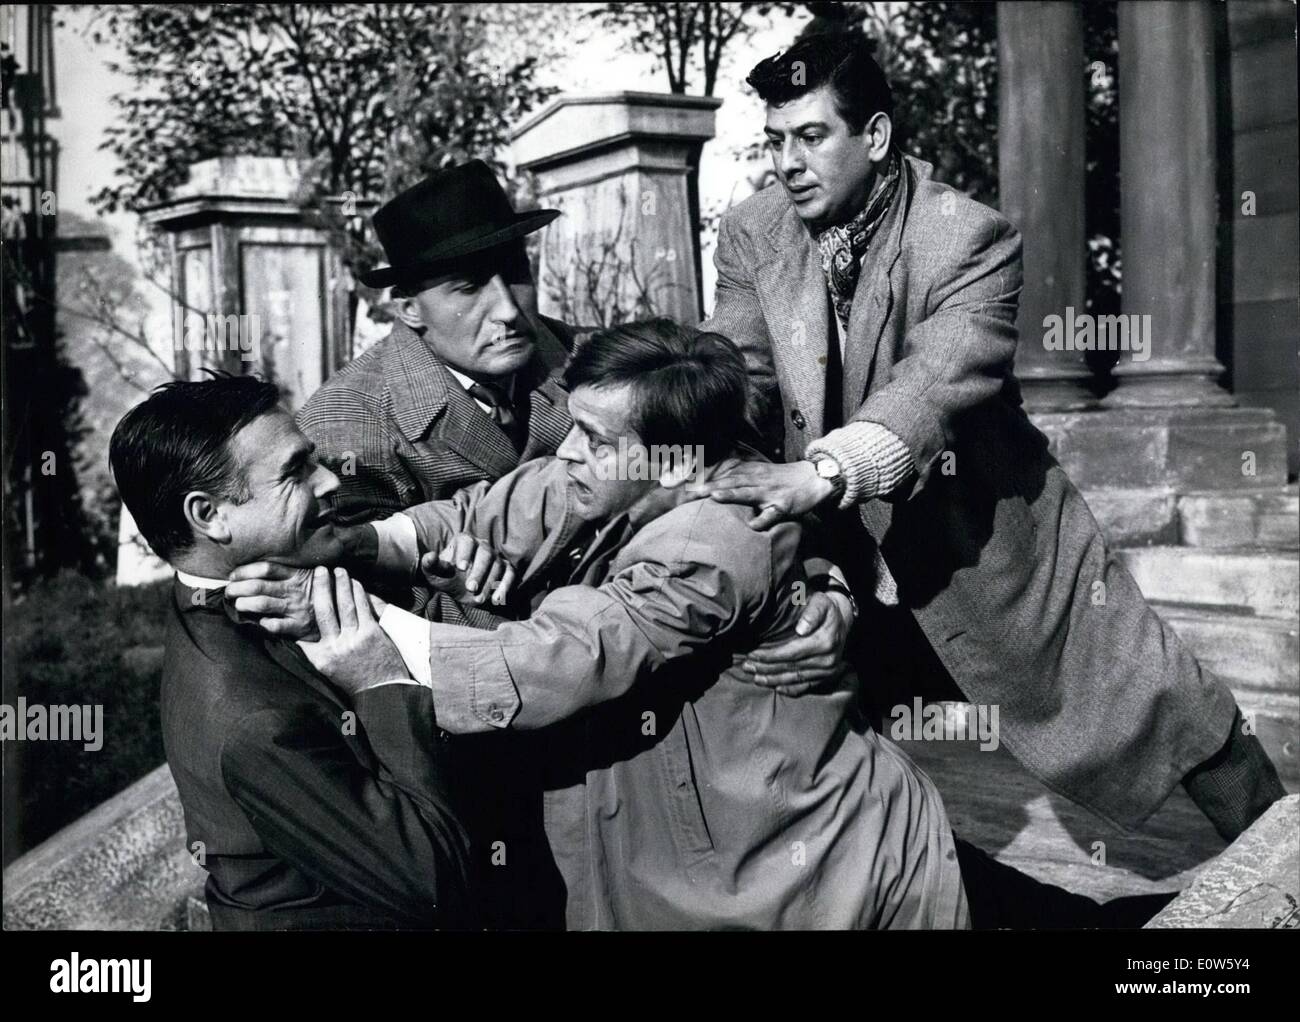 Jul. 07, 1961 - The Londoners took in their breath... When this scene of the Edgar Wallace film ''The Daffodil Mystery'' was turned with German actors in London. Barkeeper Peter Keene (Klaus Kinski) puts up a fierce resistance against his arrest. Photo Shows (left to right): Jeachim Fuchsberger (Fuchsberger), Walter Gotell (Gotell), Kalus Kinski (Kinski) and Martin Lyder (Lyder) Stock Photo